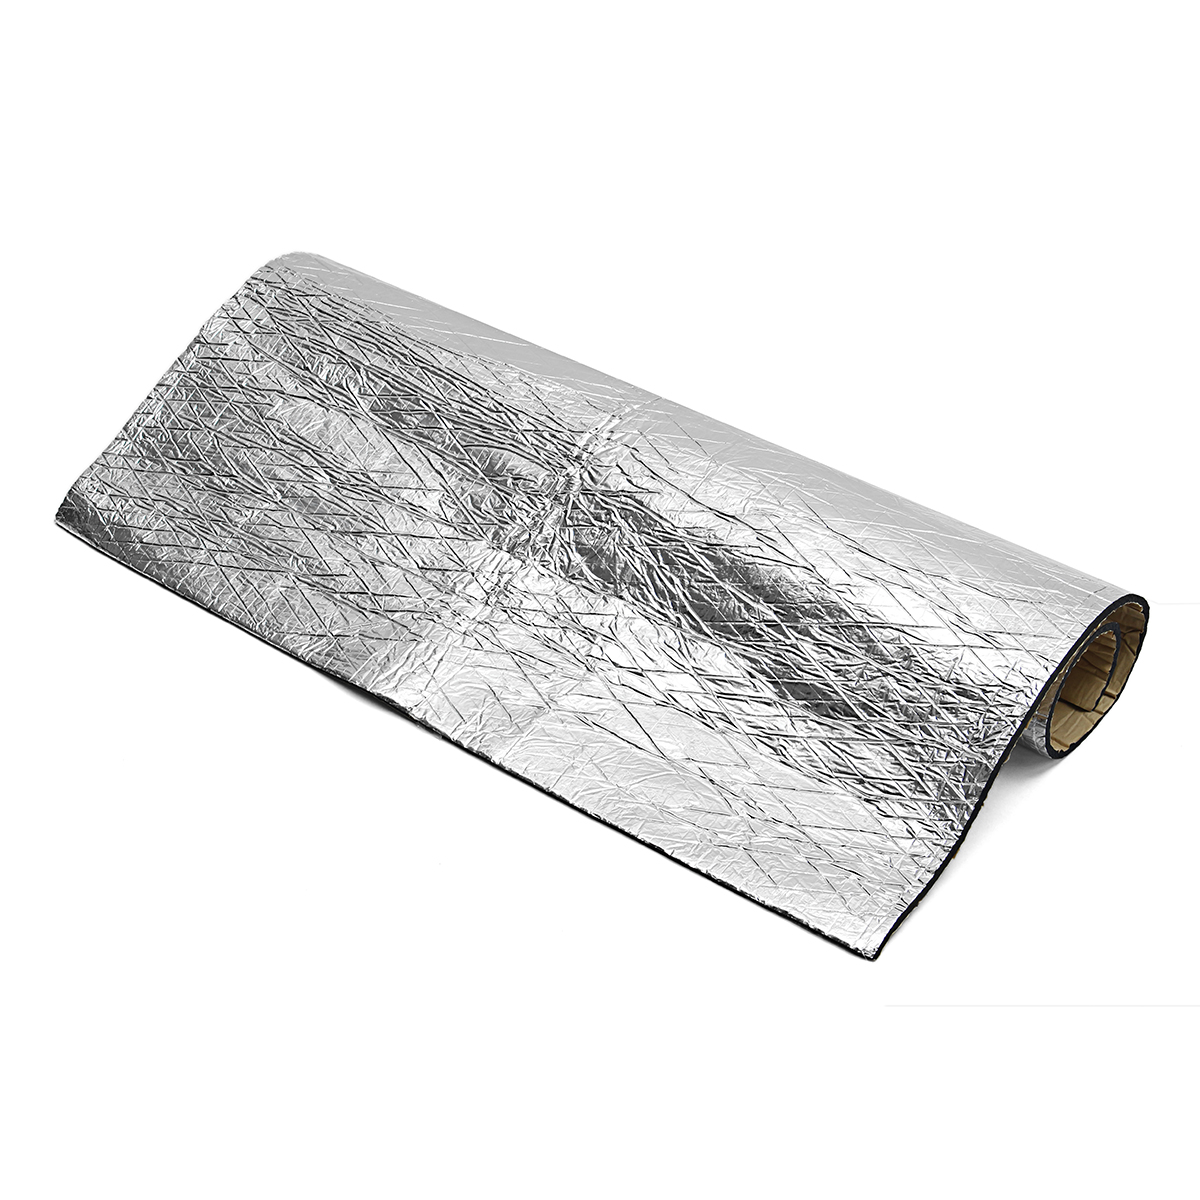 140/100*100cm Glass Fibre Sound Proofing Deadening Insulation 7mm Closed Cell Foam